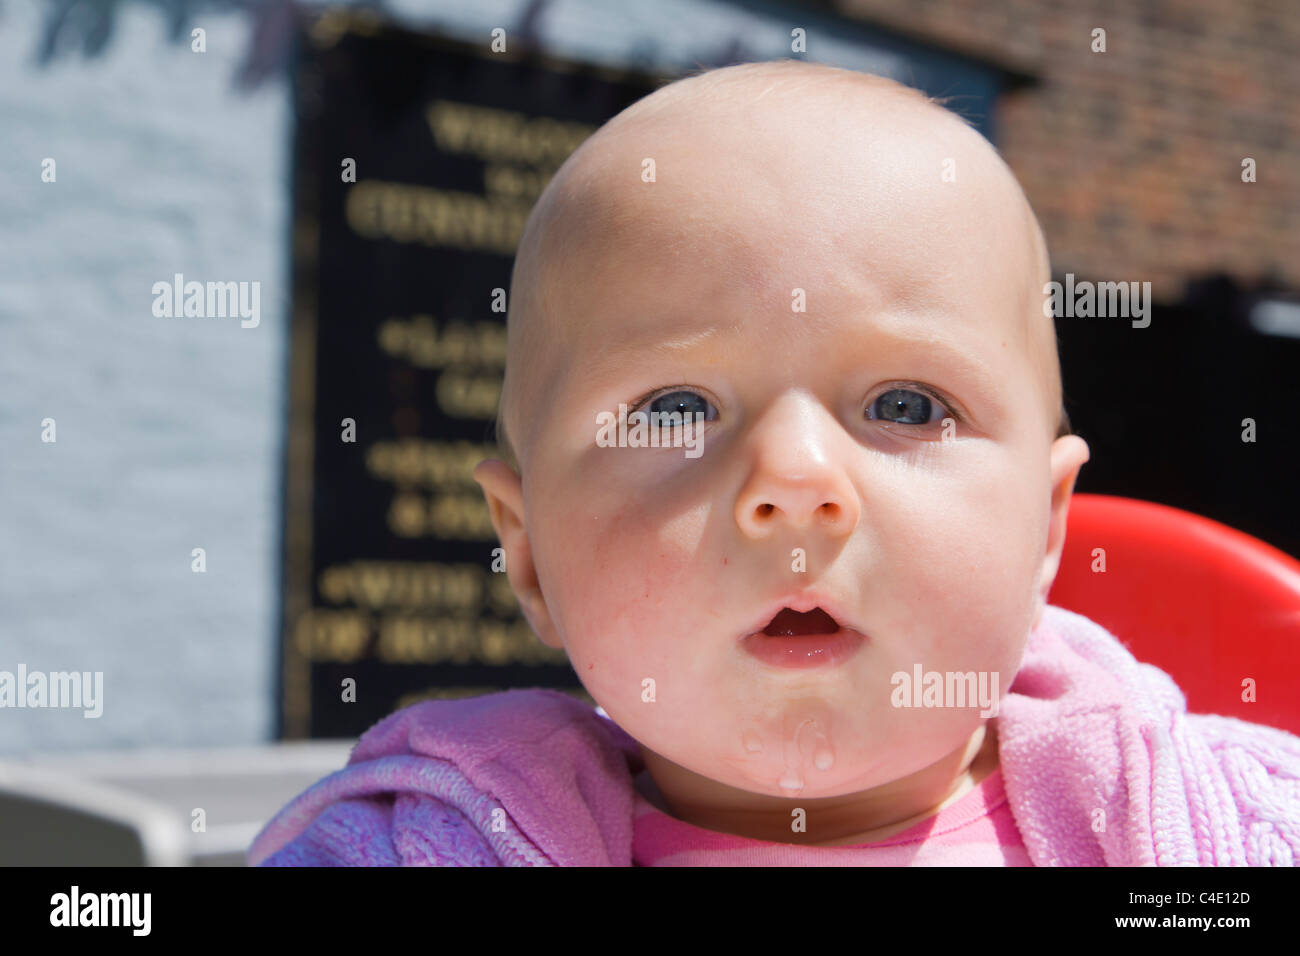 7 months old baby girl Stock Photo